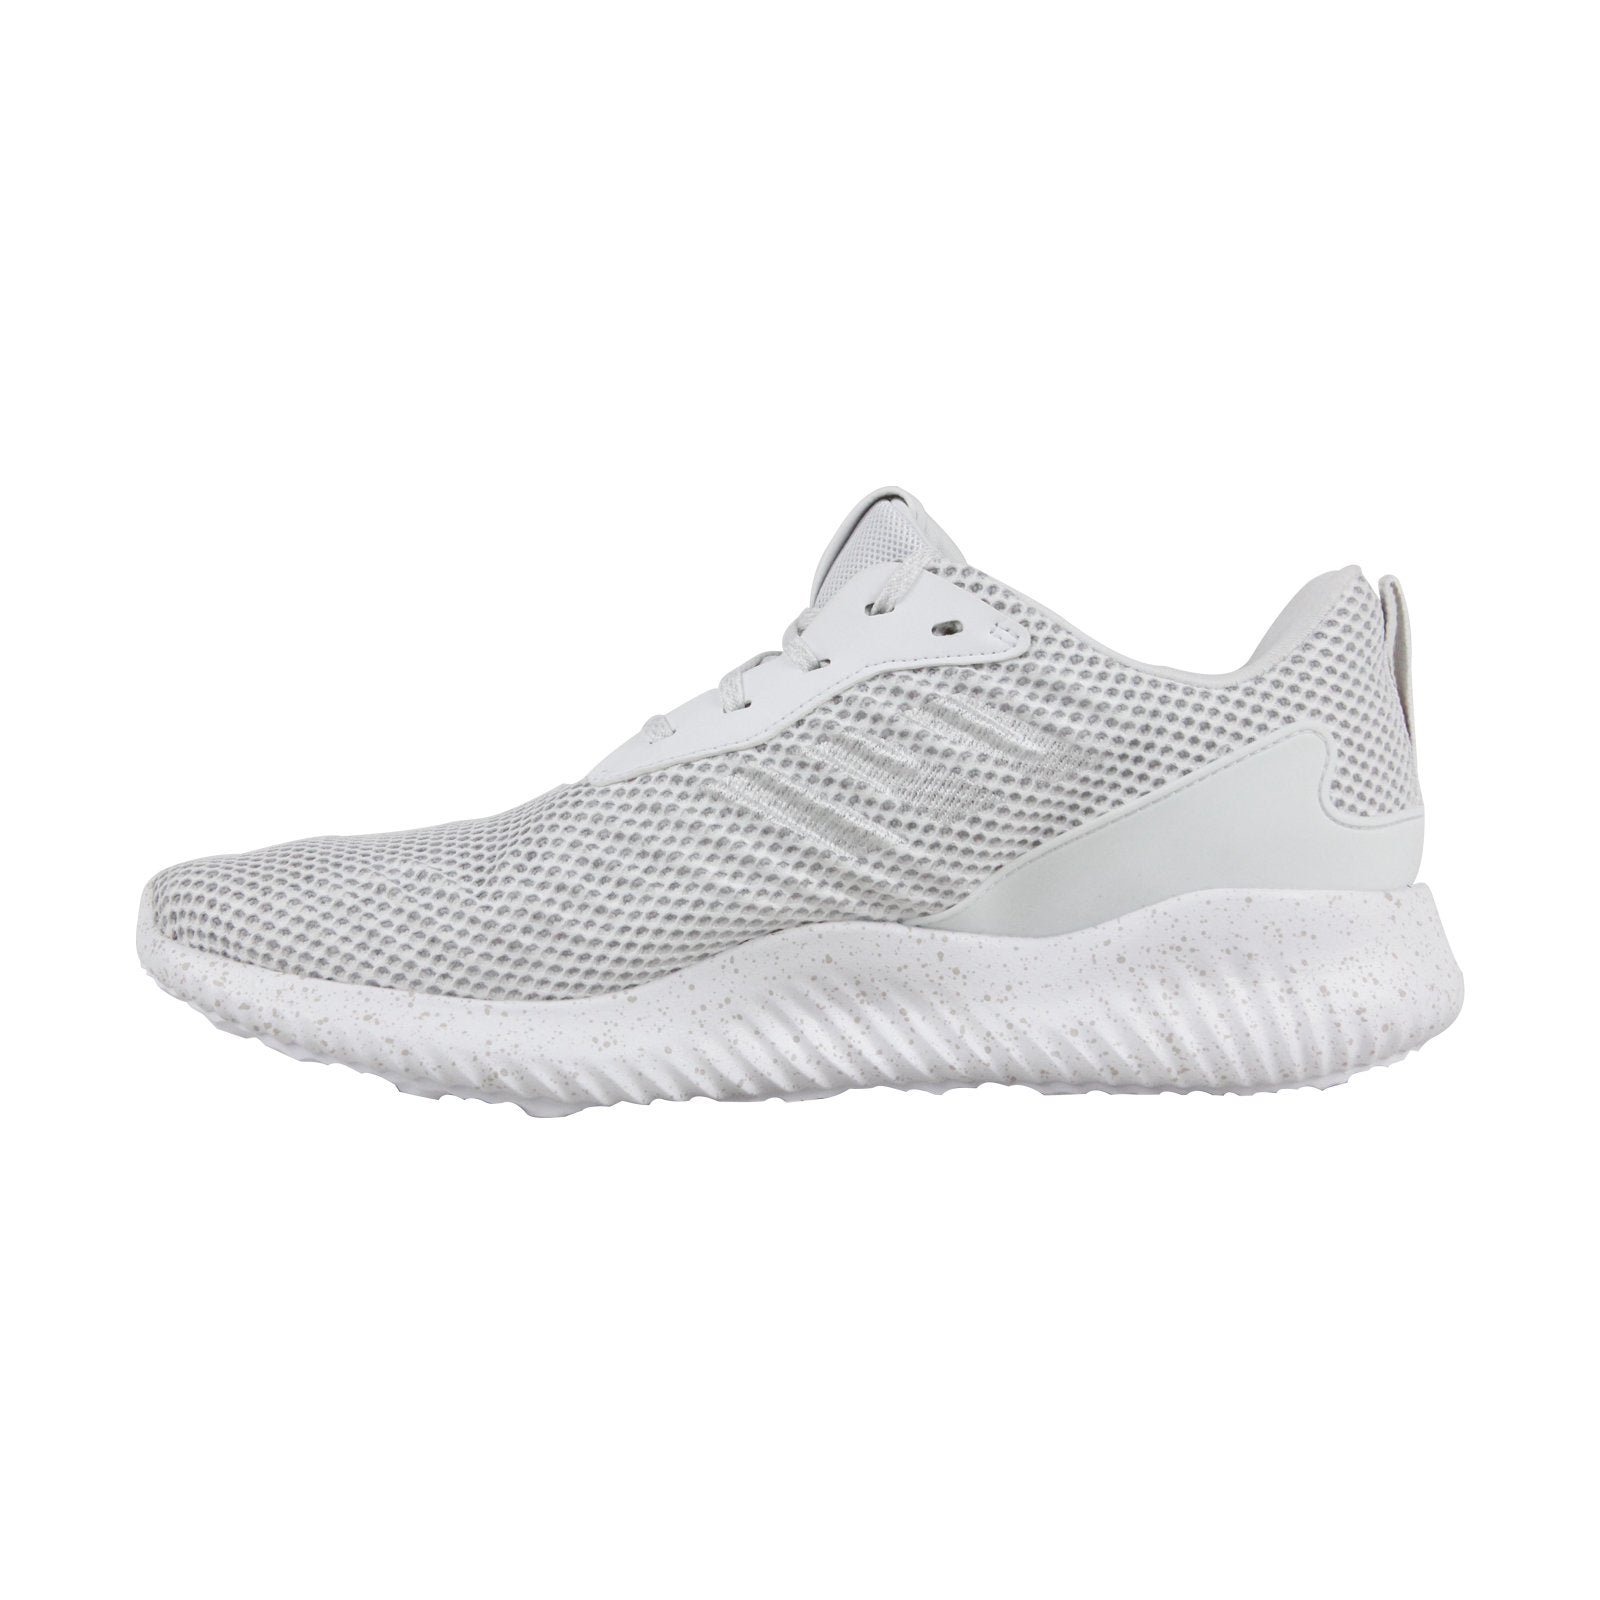 Adidas Alphabounce Rc CG5125 Mens White Mesh Lace Up Athletic Running -  Ruze Shoes